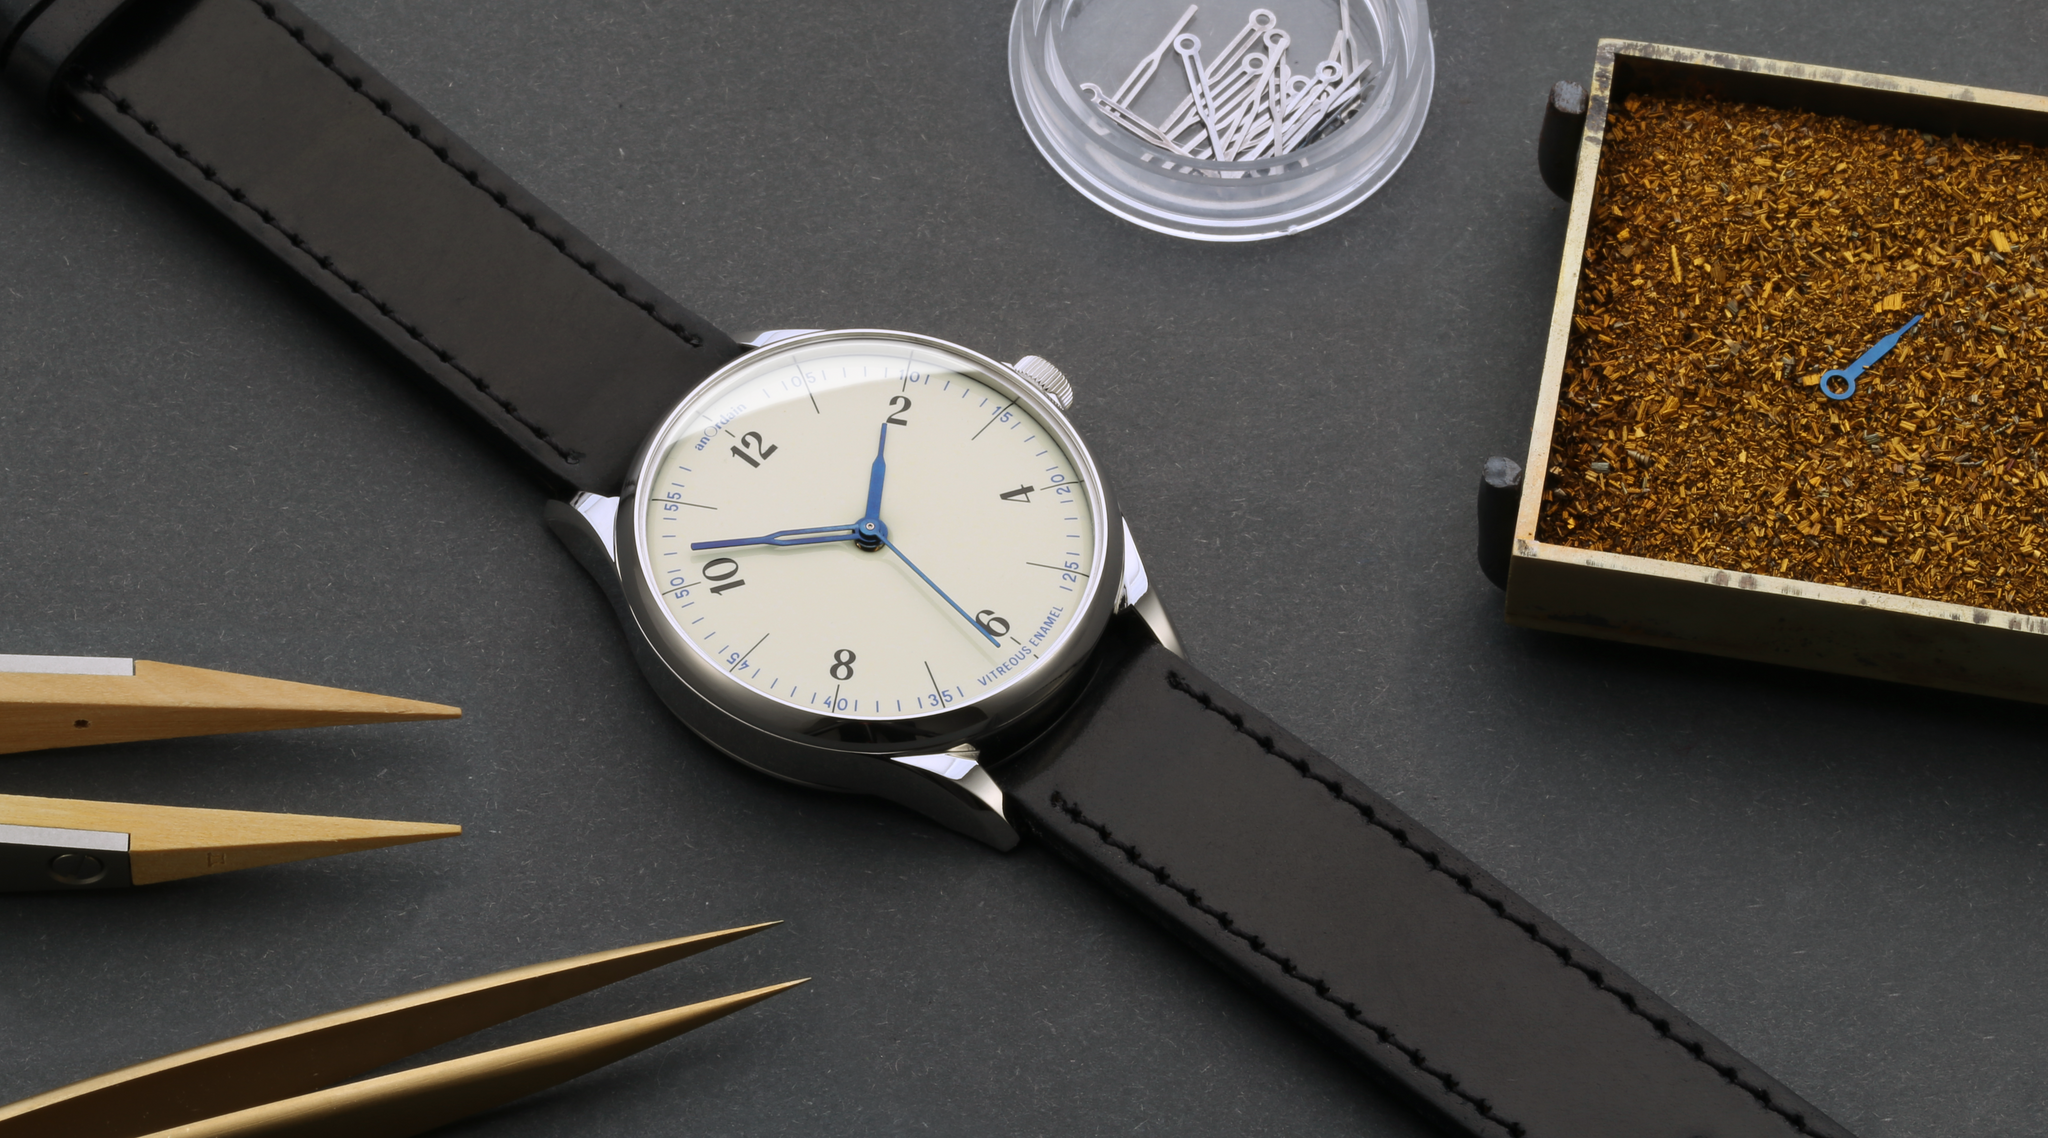 anOrdain Model 1 watch featuring thermally blued steel watch hands lies beside tools used in the heat treatment process